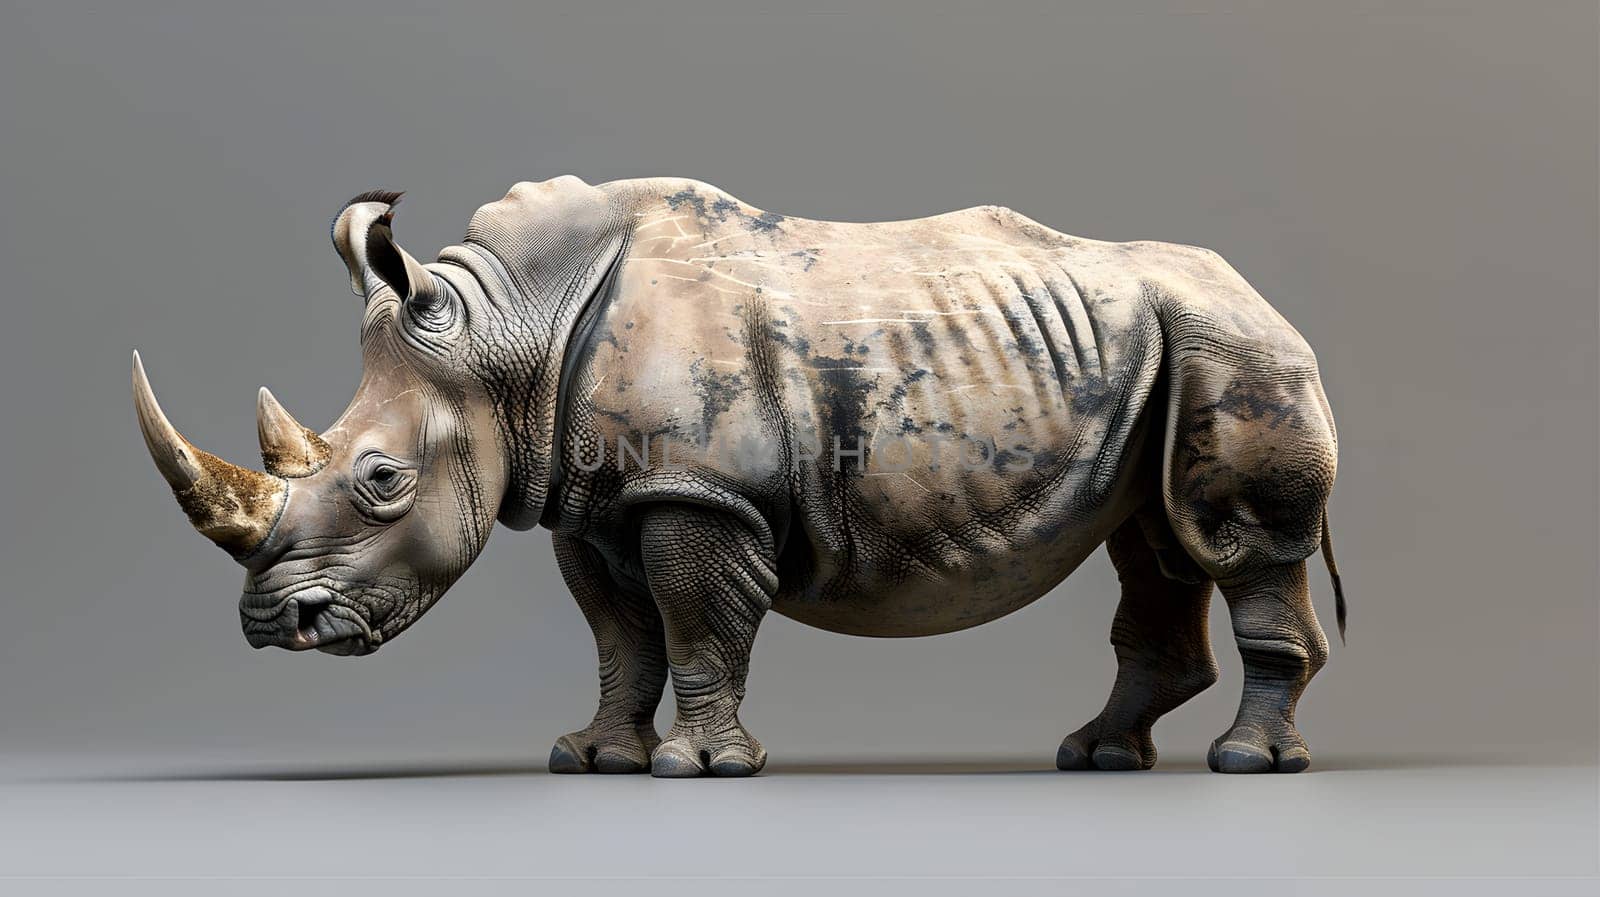 A 3D model depicting a terrestrial animal known as a rhinoceros standing on a gray surface, showcasing its natural material horn and distinct snout. The art captures the essence of wildlife